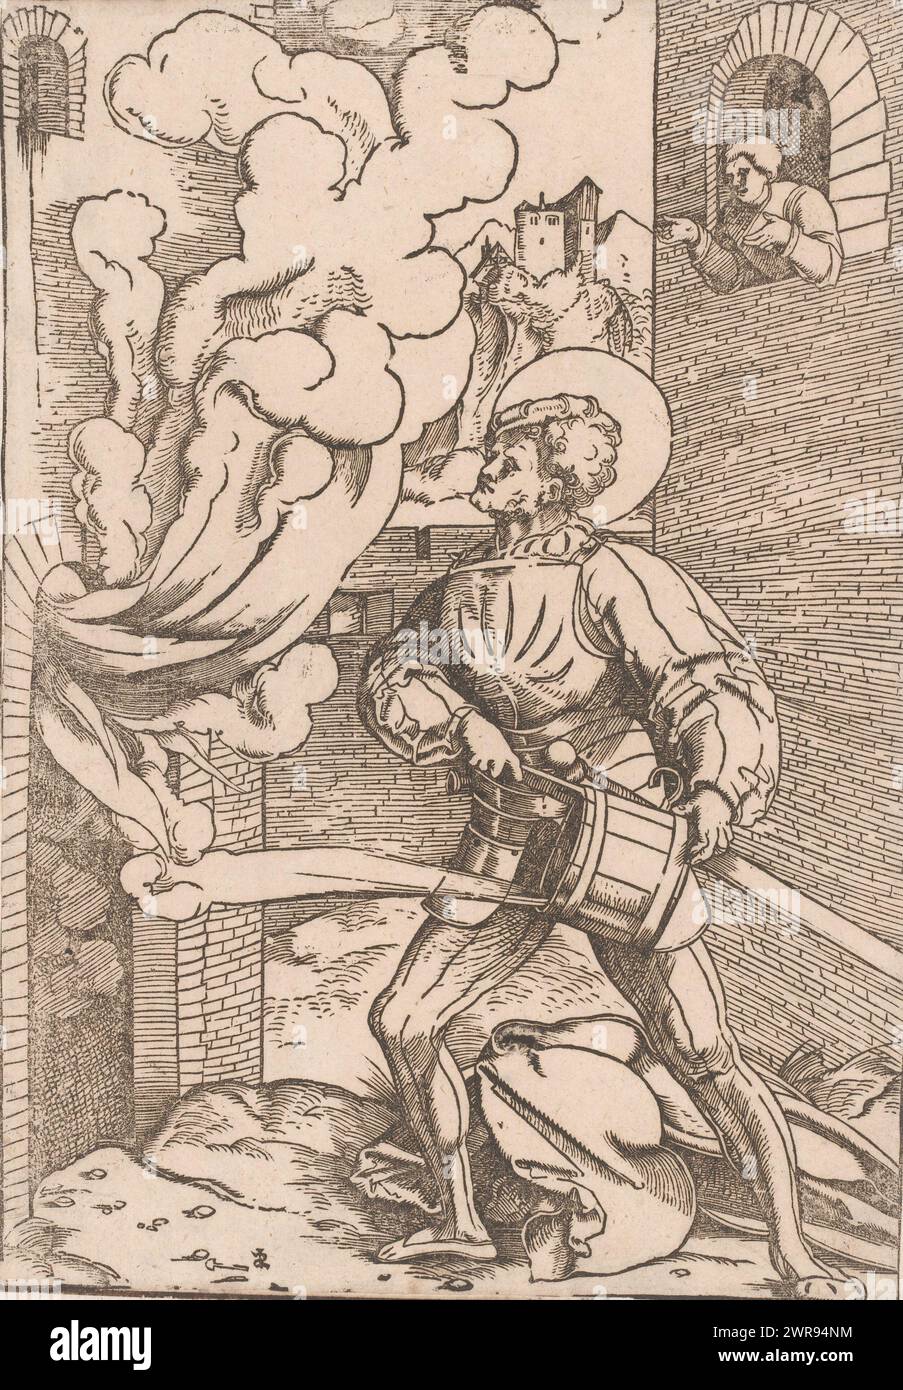 Saint Florian, print maker: anonymous, after design by: Monogrammist IS, 1500 - 1550, paper, height 288 mm × width 198 mm, print Stock Photo